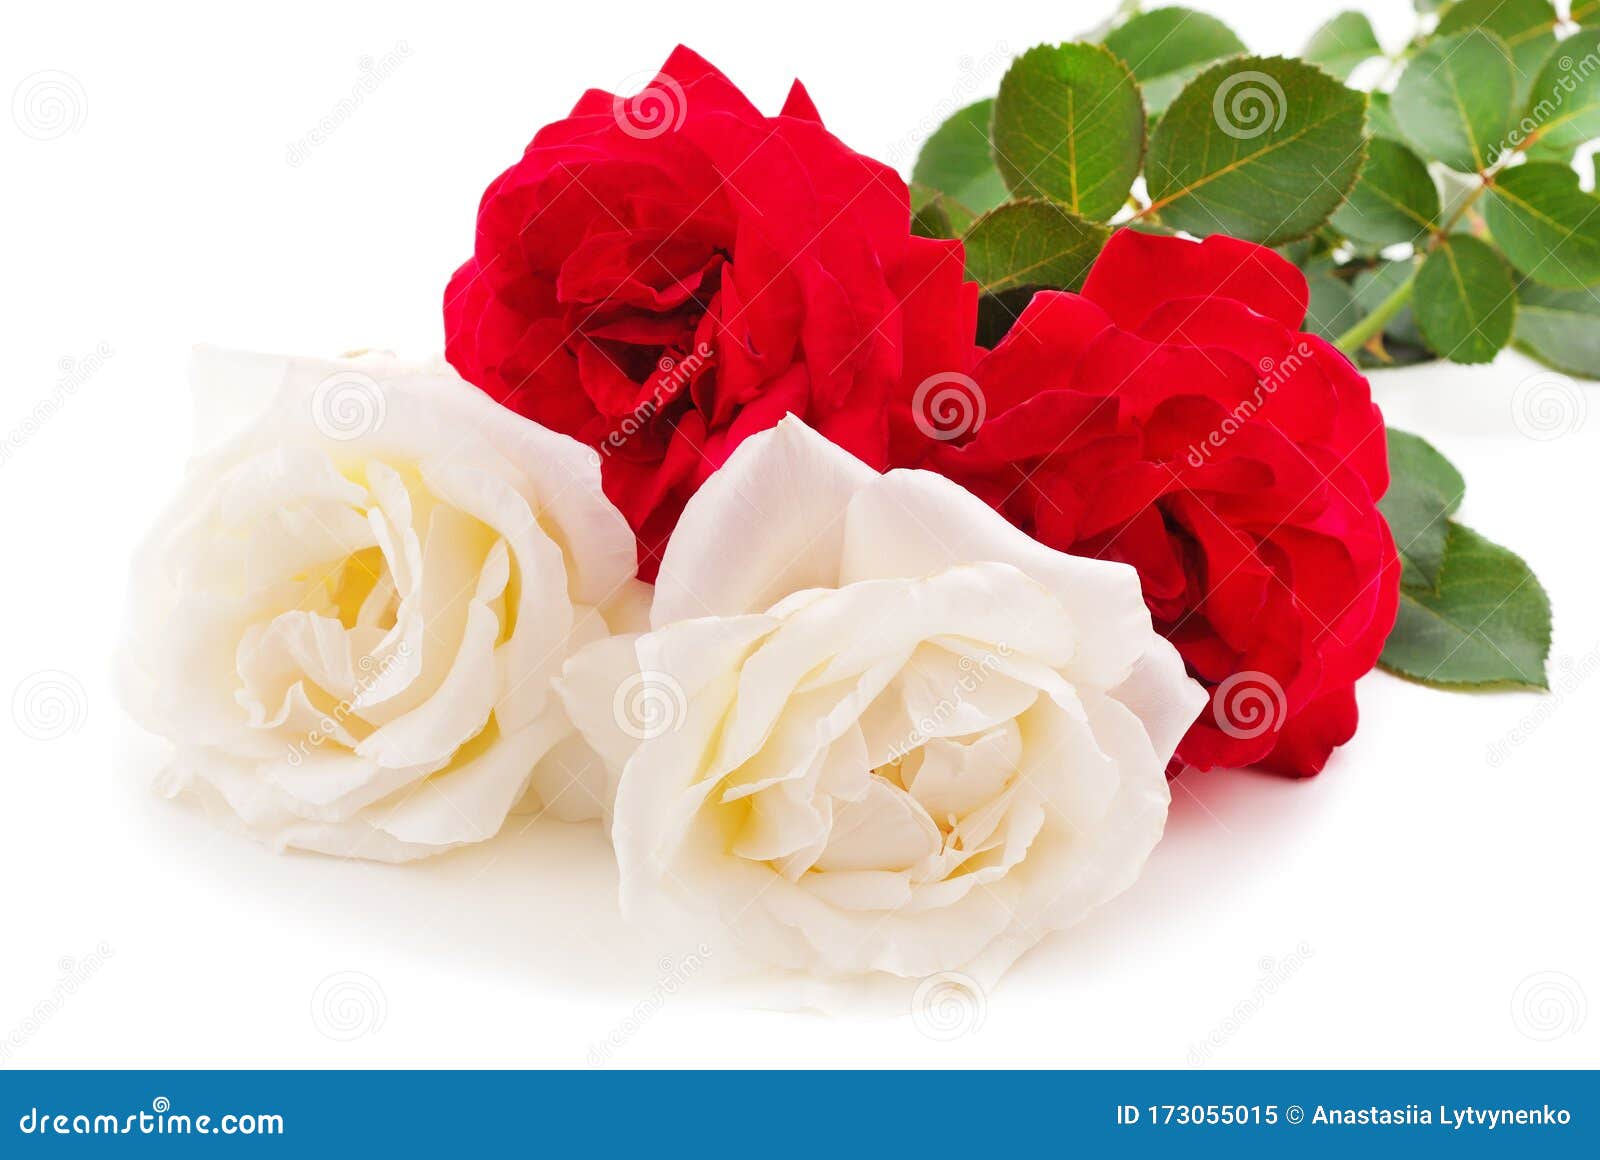 Beautiful White and Red Roses Stock Image - Image of bright ...